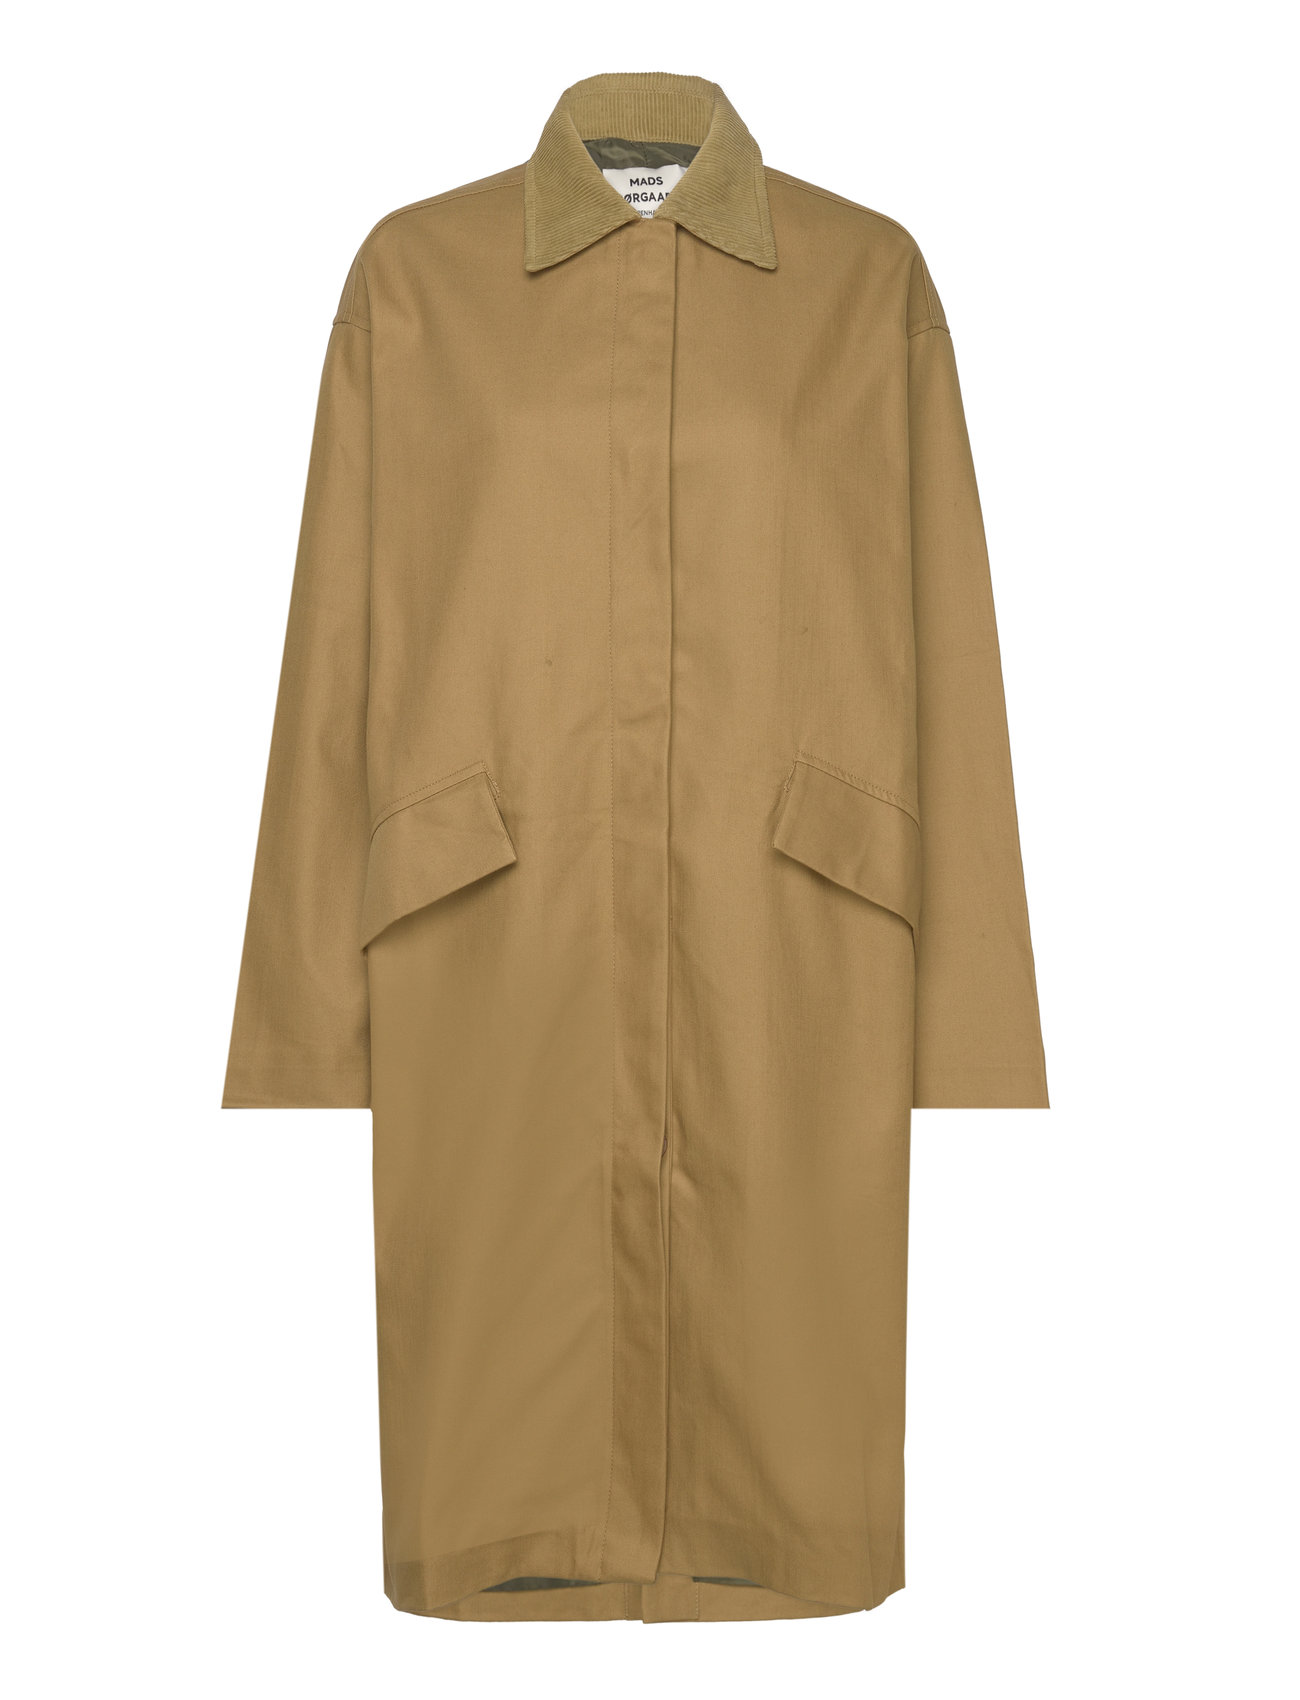 Mads Nørgaard Heavy Twill River Coat - 440 €. Buy Light Coats from Mads ...